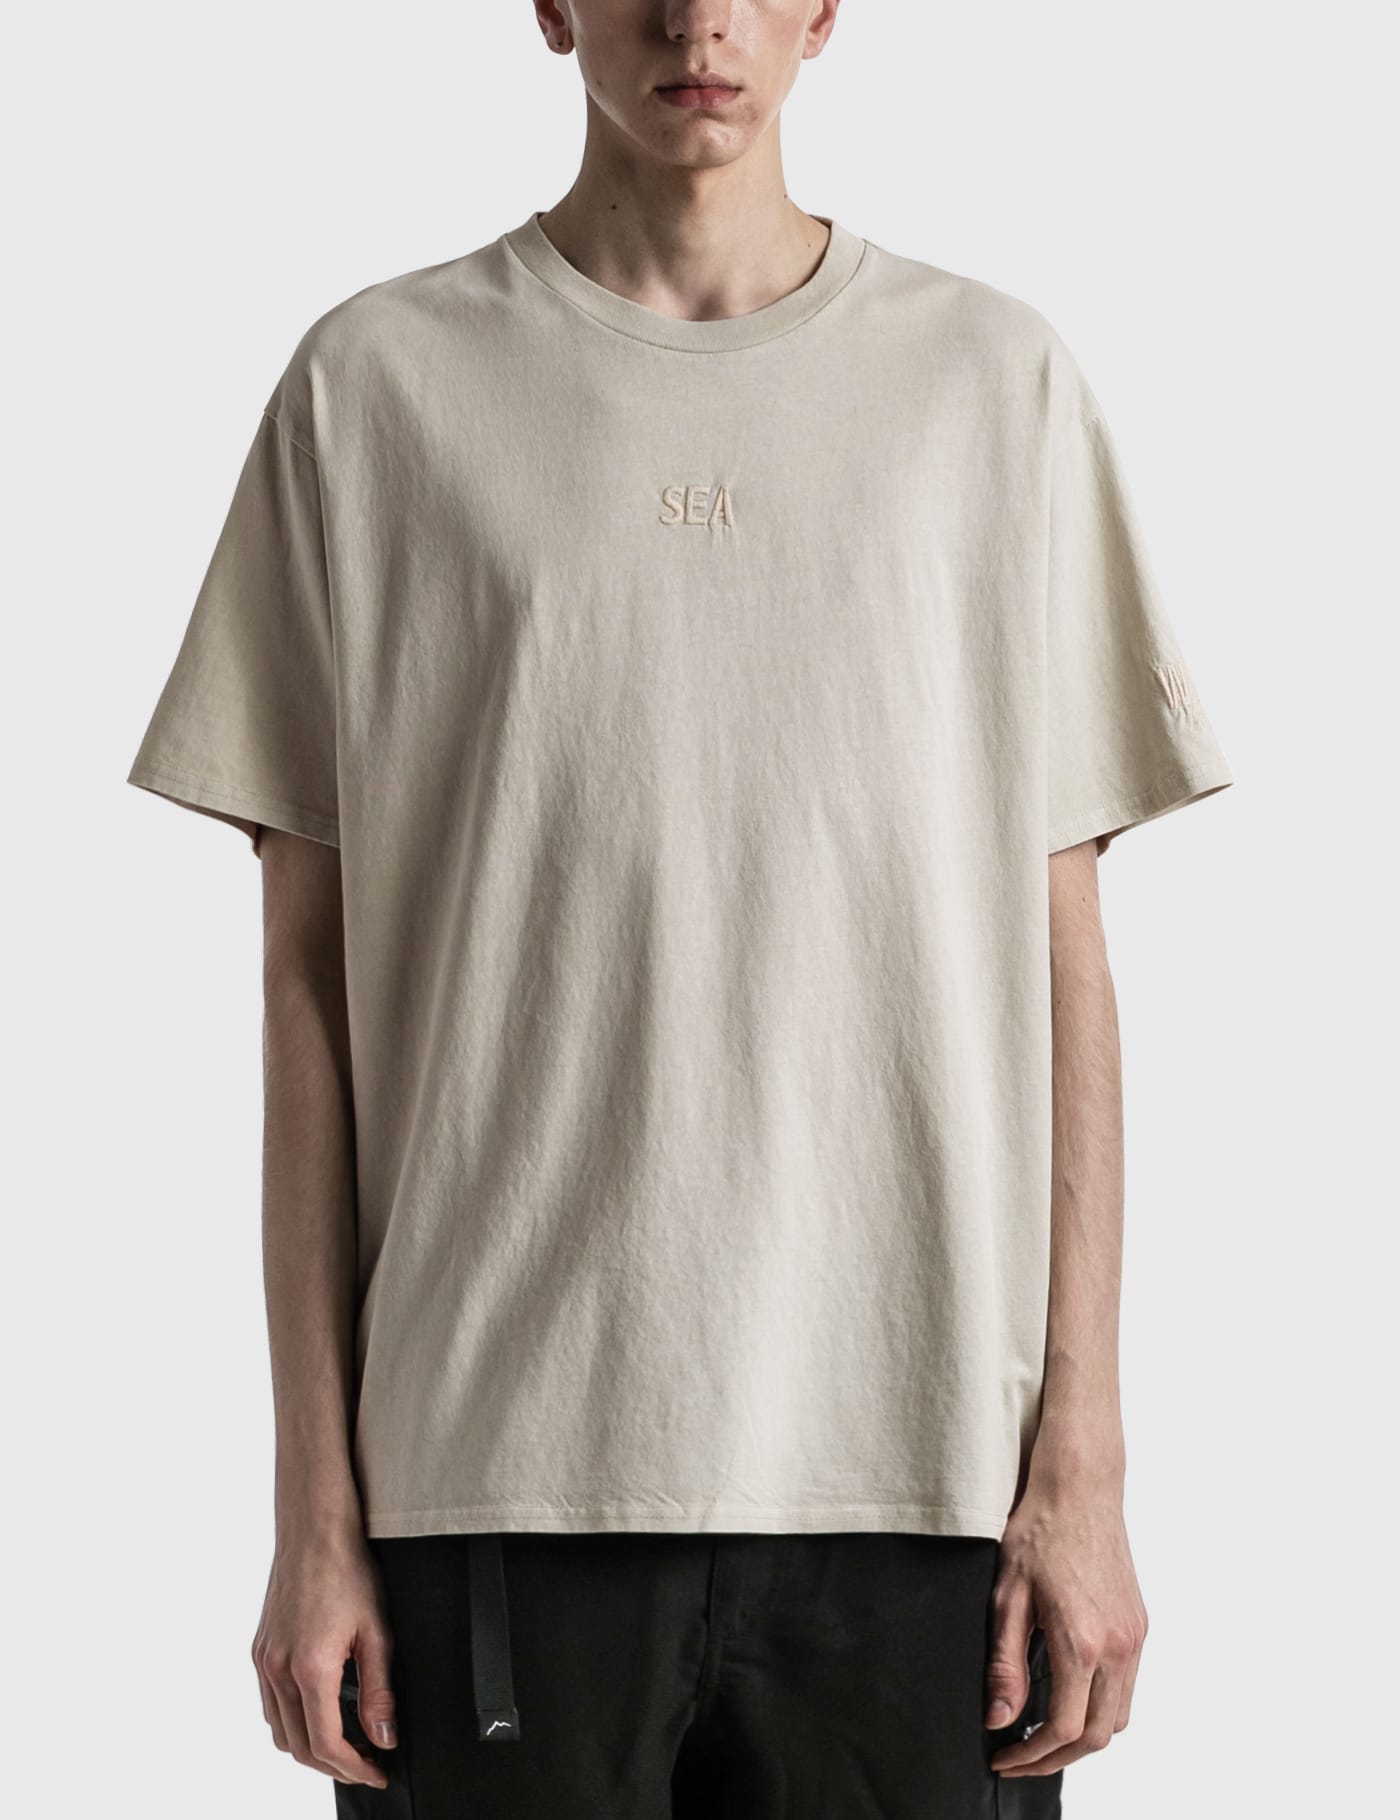 Wind And Sea - Sea Alive T-shirt | HBX - Globally Curated Fashion ...